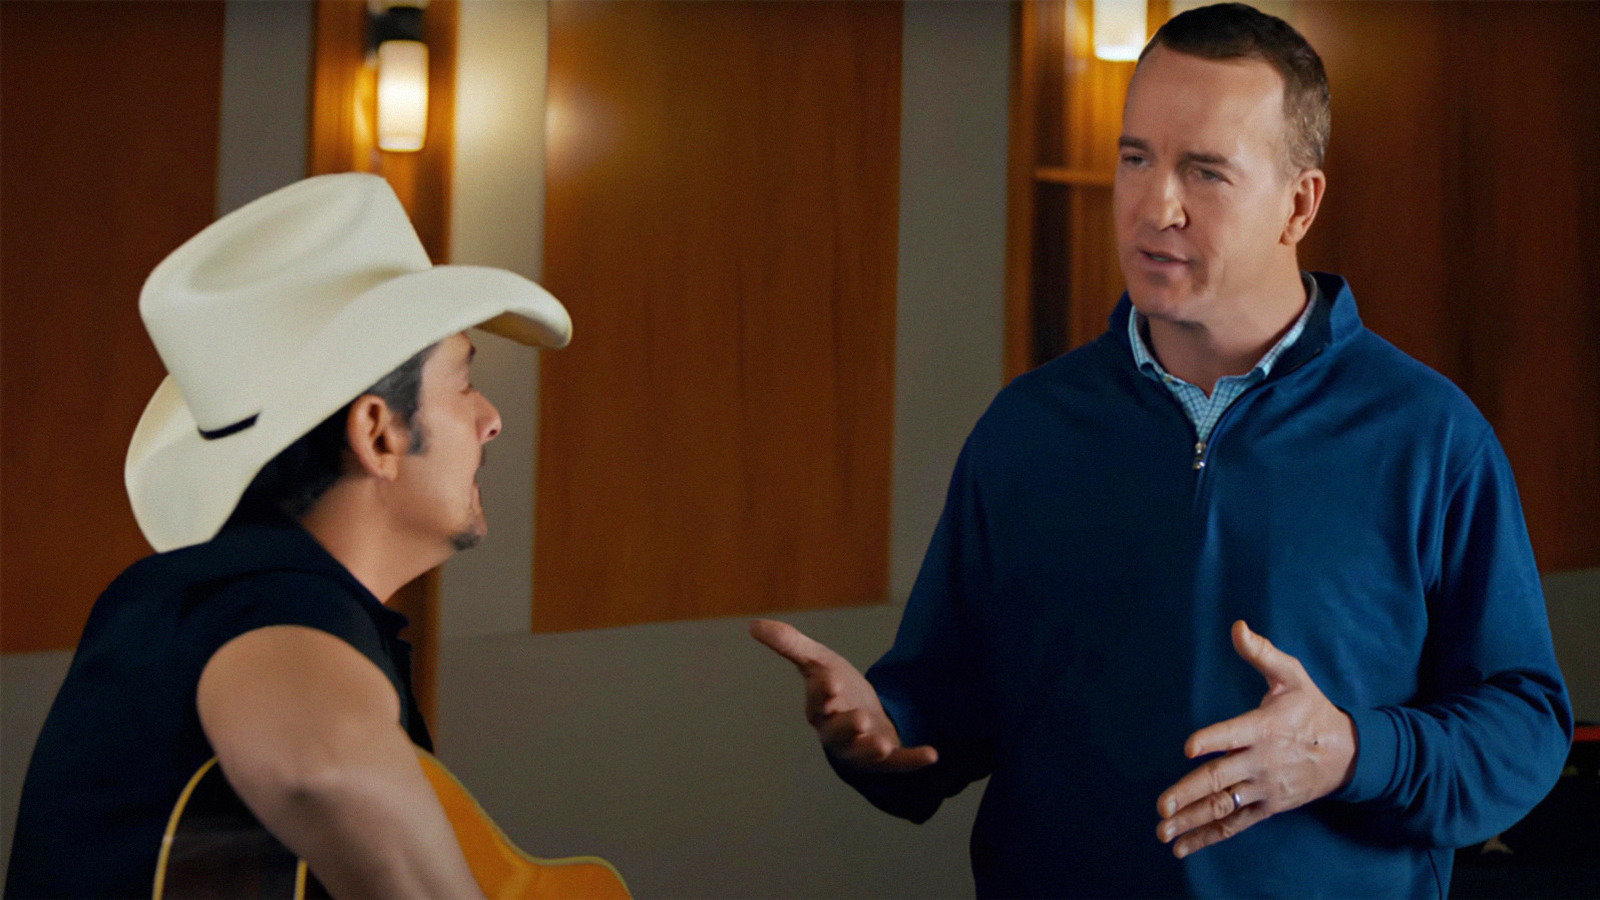 Who Is The Singer In Peyton Manning's Nationwide Commercial?